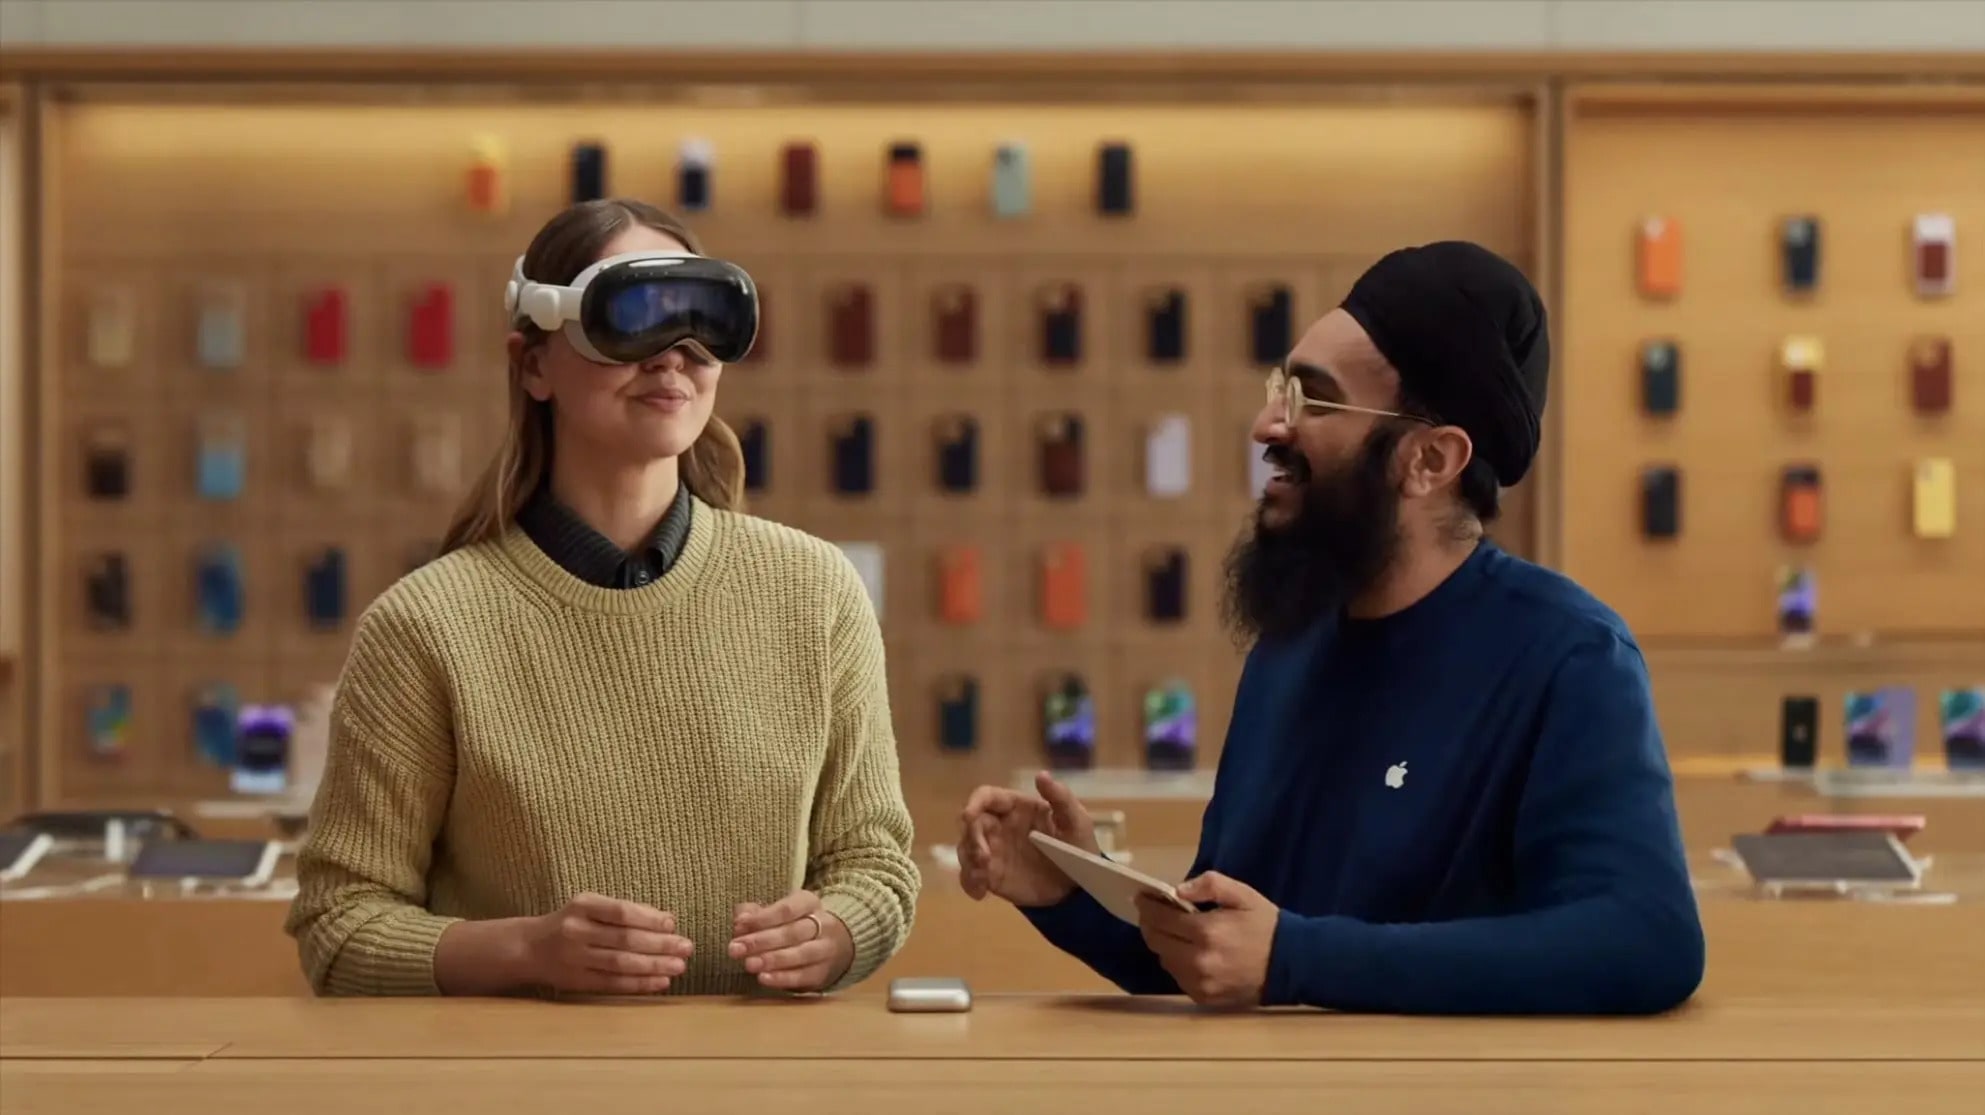 An Apple Store staff member shows a customer how to use a Vision Pro headset.